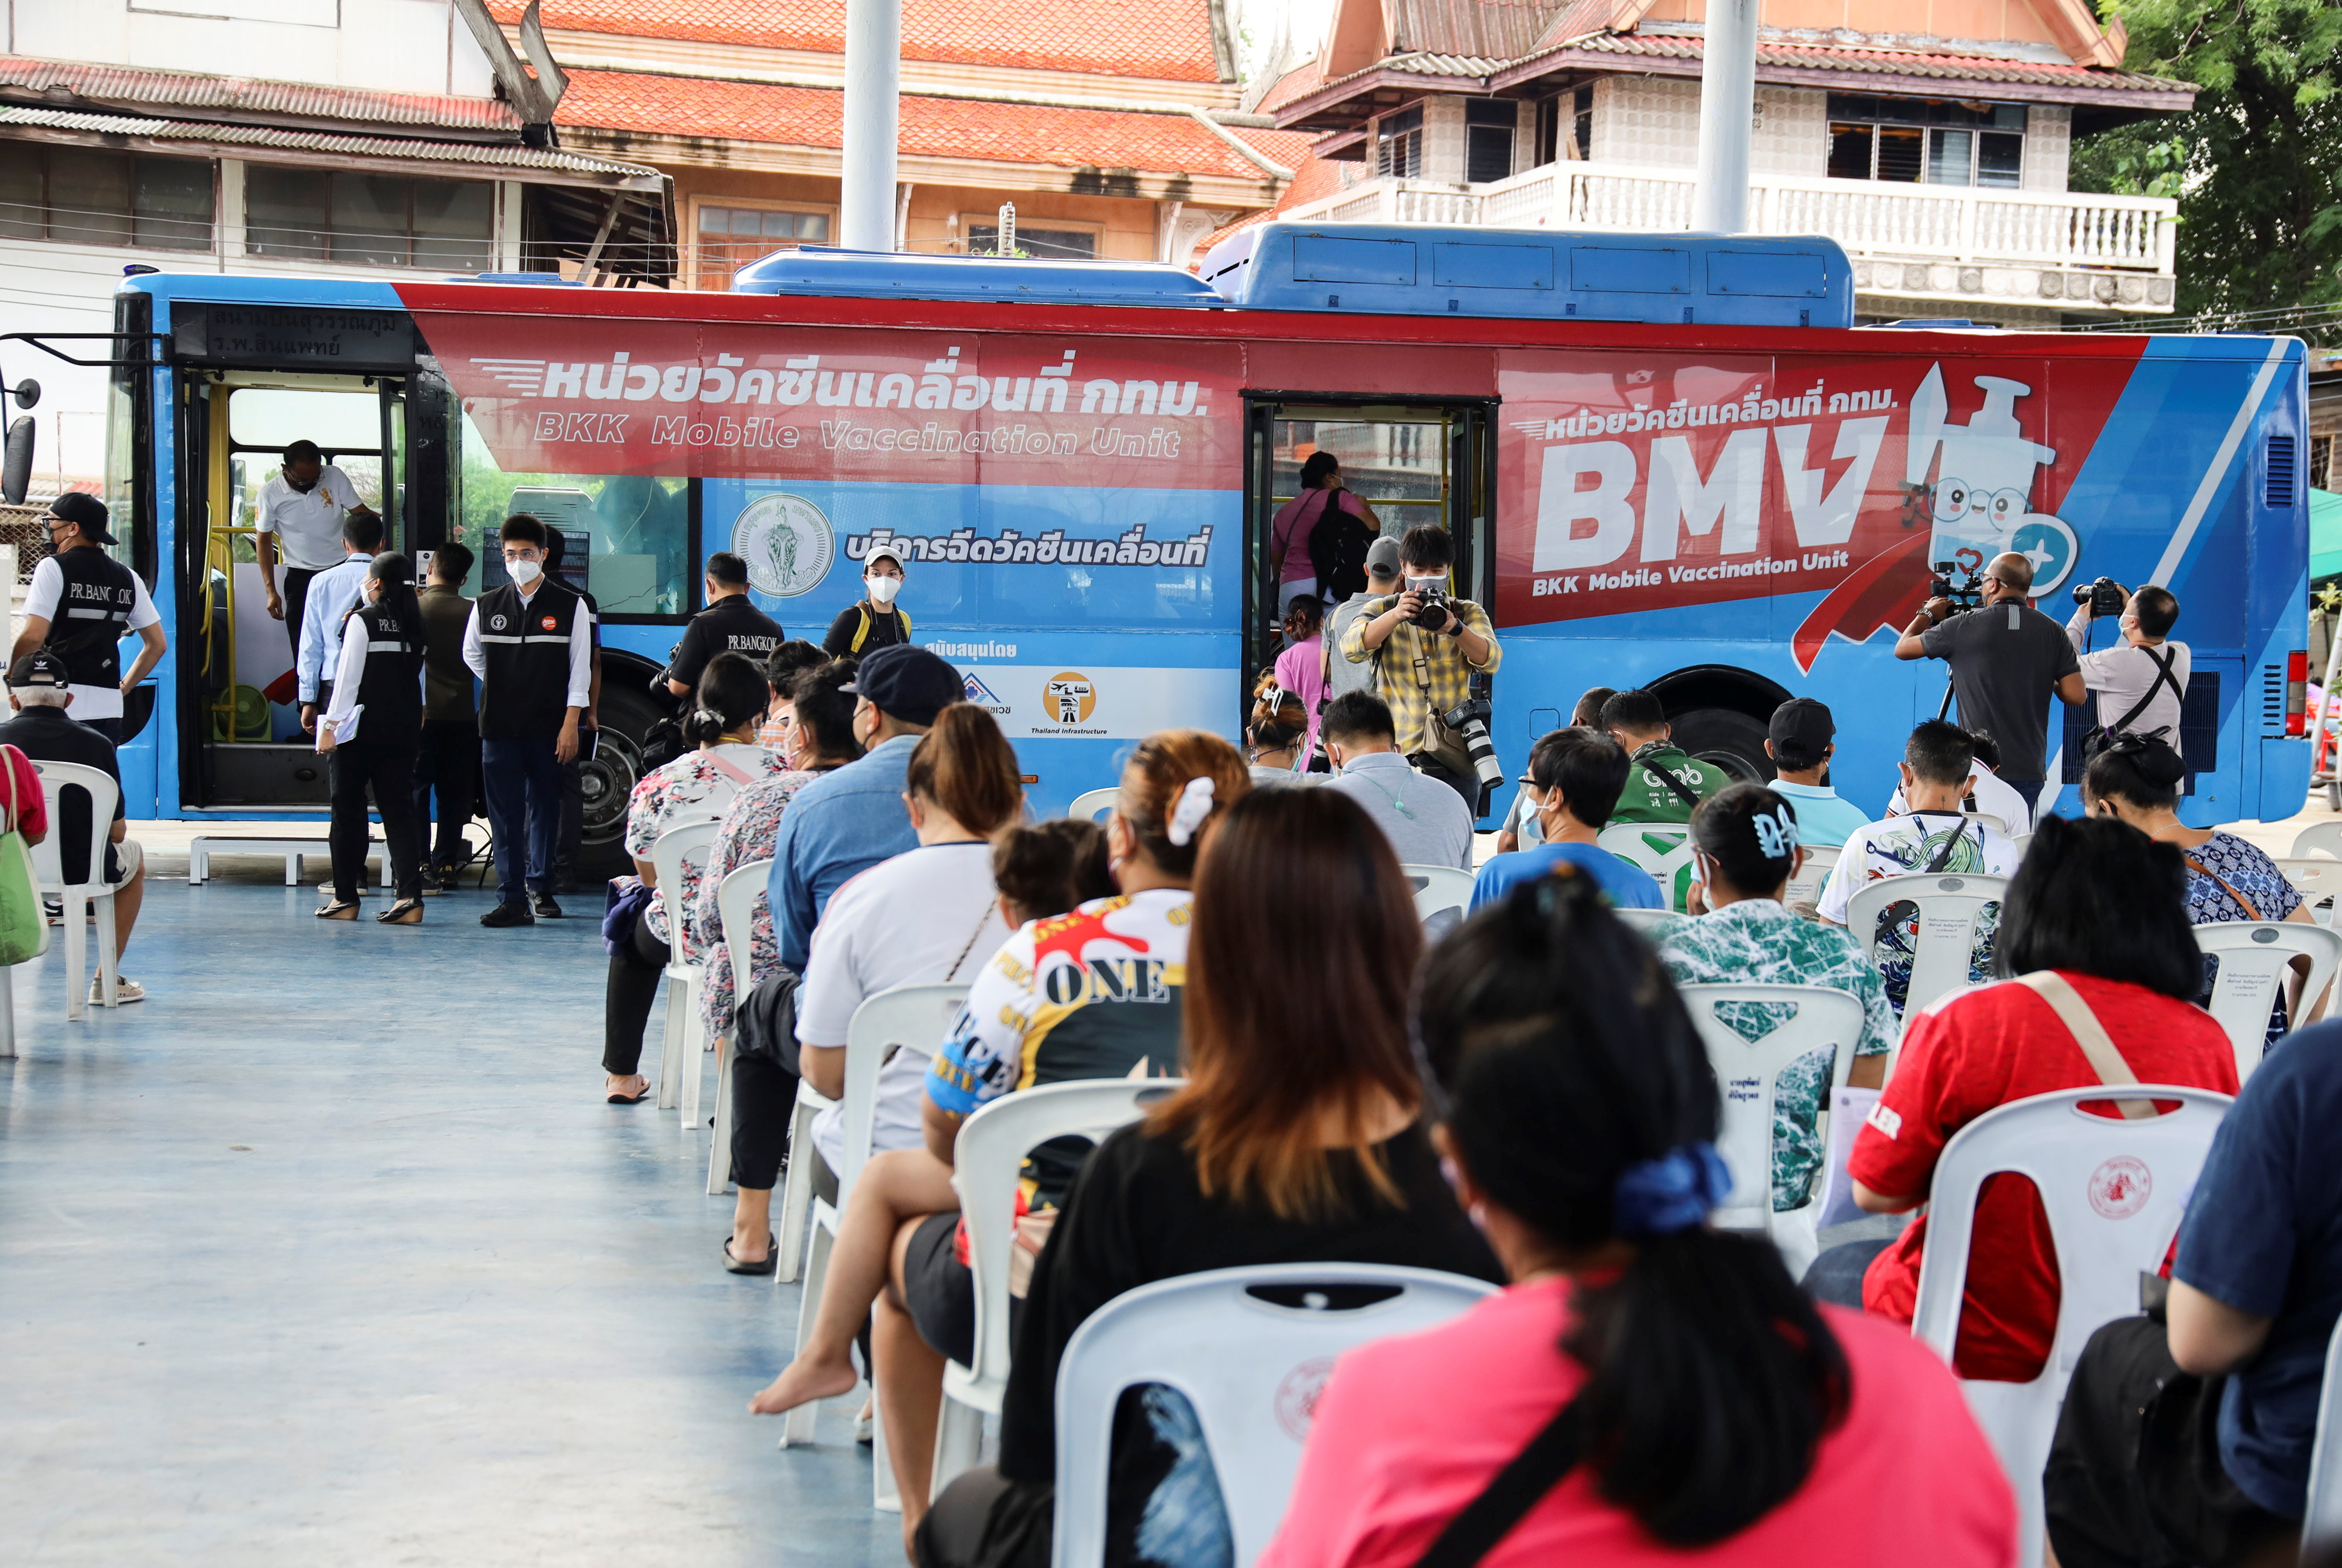 People wait in front of a coronavirus disease (COVID-19) mobile vaccination bus set-up to serve the elderly and disabled groups in Bangkok, Thailand, September 8, 2021. REUTERS/Juarawee Kittisilpa